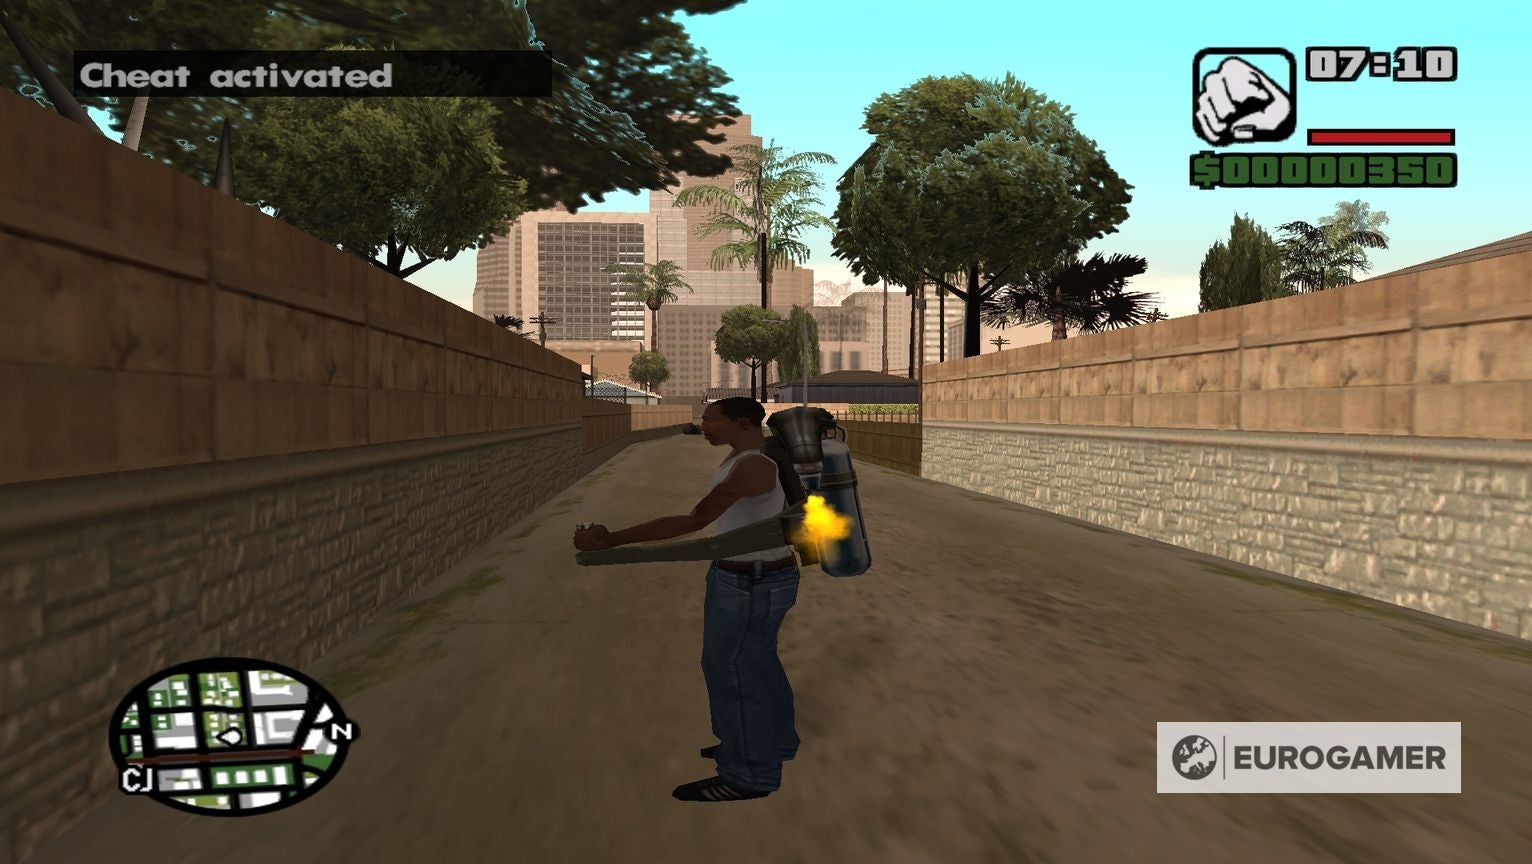 GTA Andreas Cheats for PlayStation, Xbox, Switch, PC Mobile Eurogamer.net